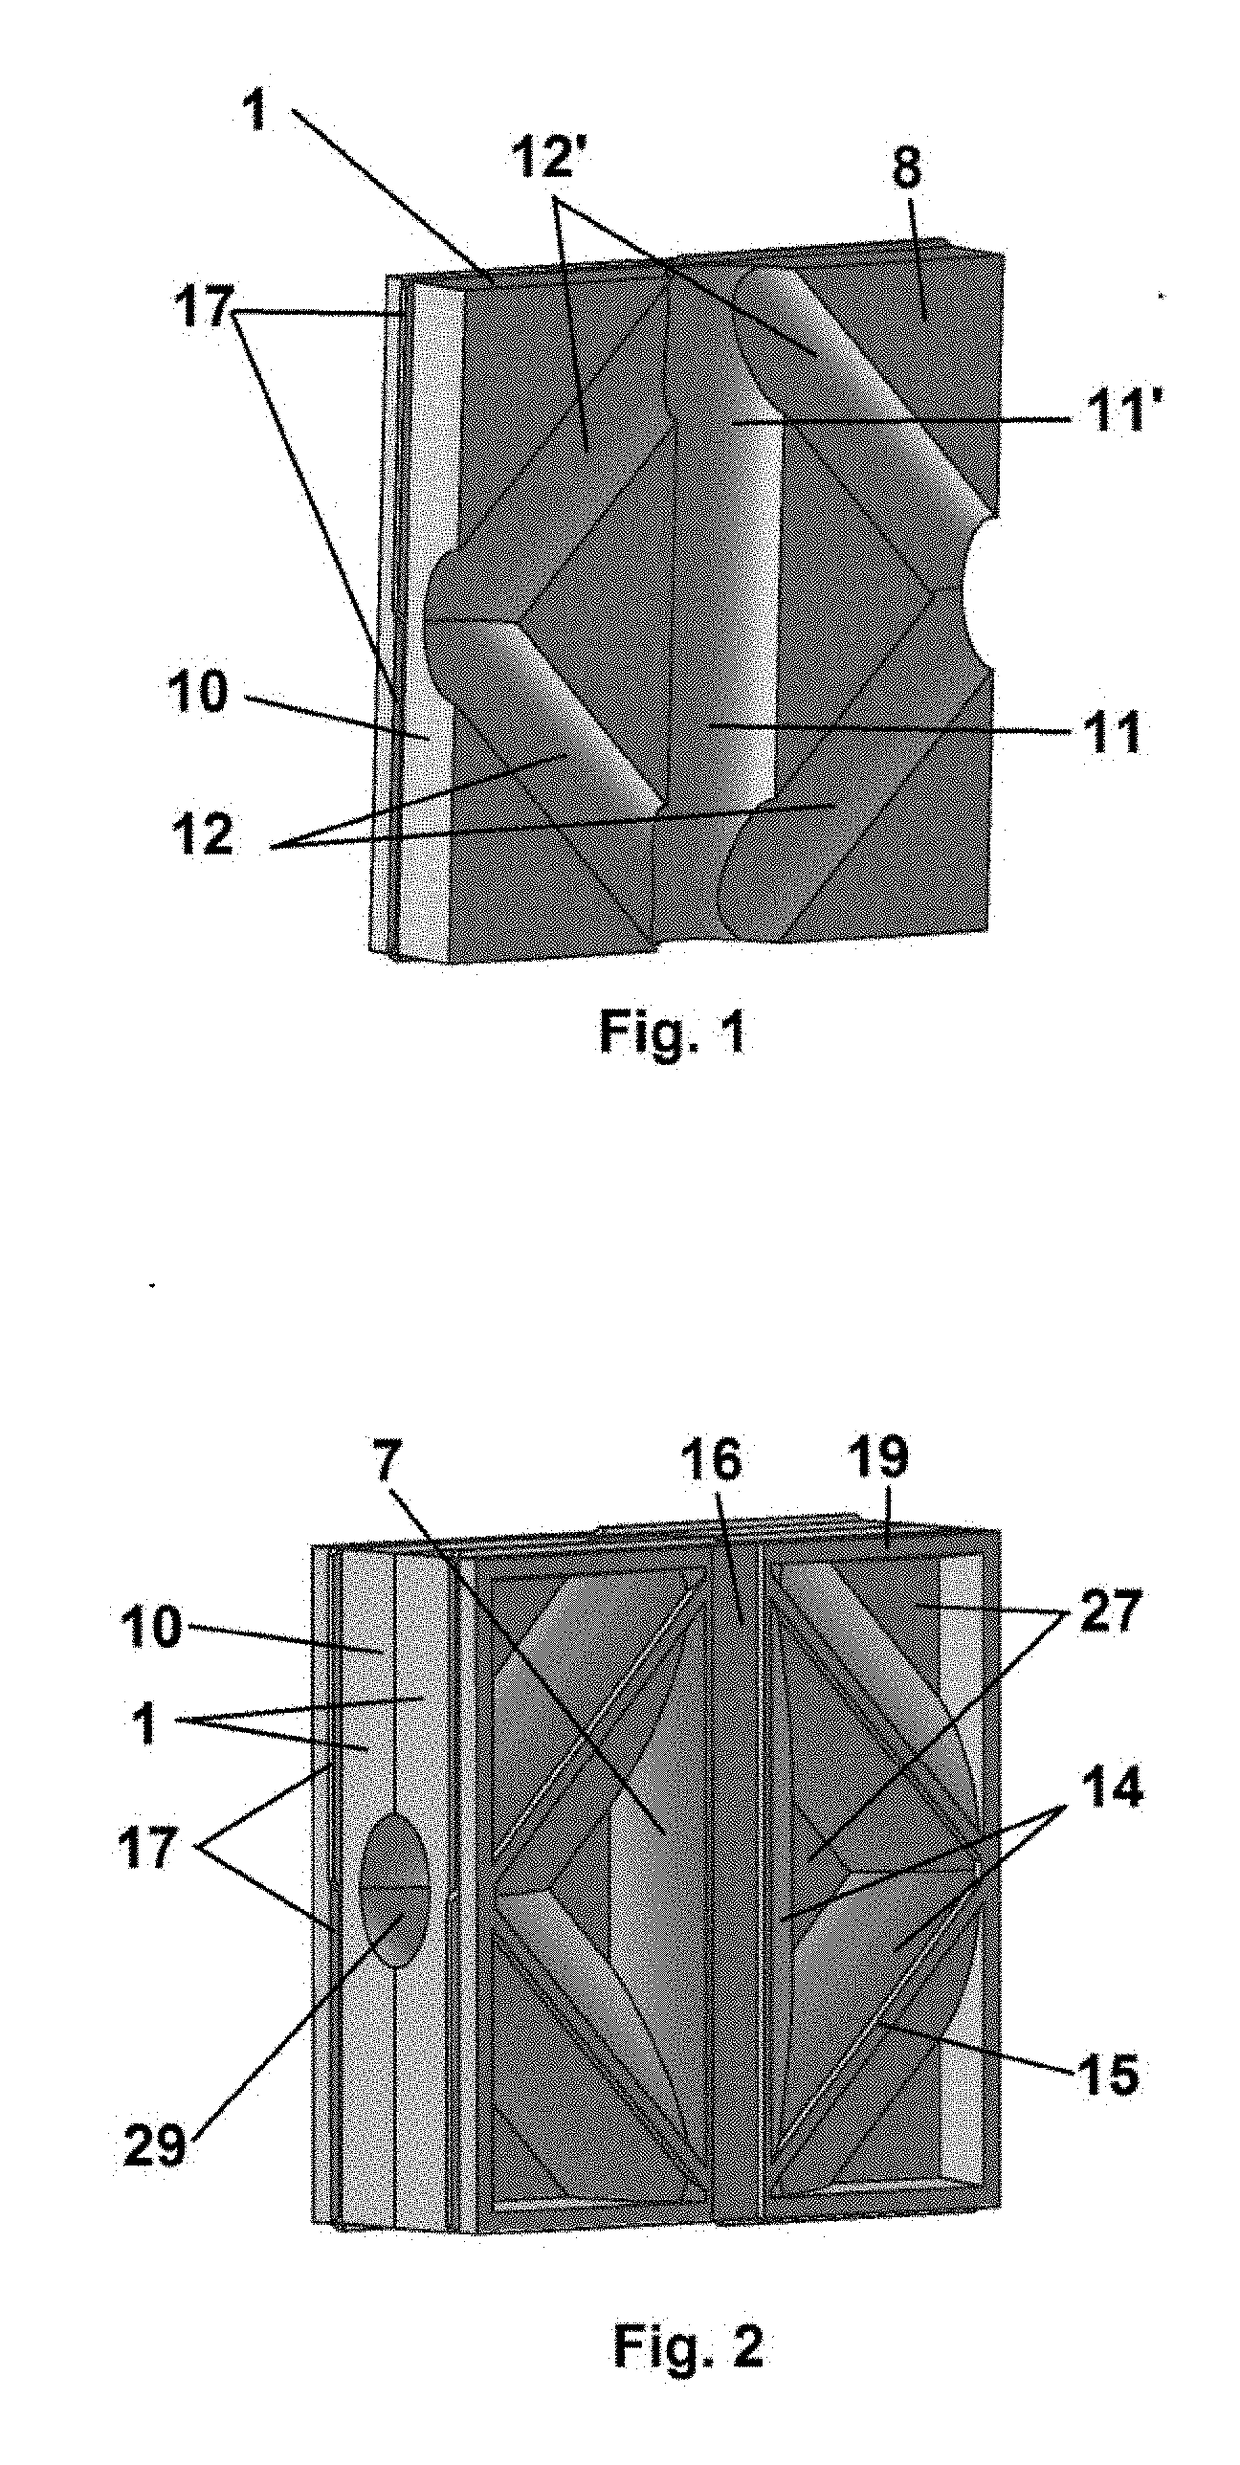 Precast Building Block, Modular Element with Optimized Geometry, Process for Obtaining the Modular Element, Construction, Method for Obtaining a Building by Assembling the Modular Elements